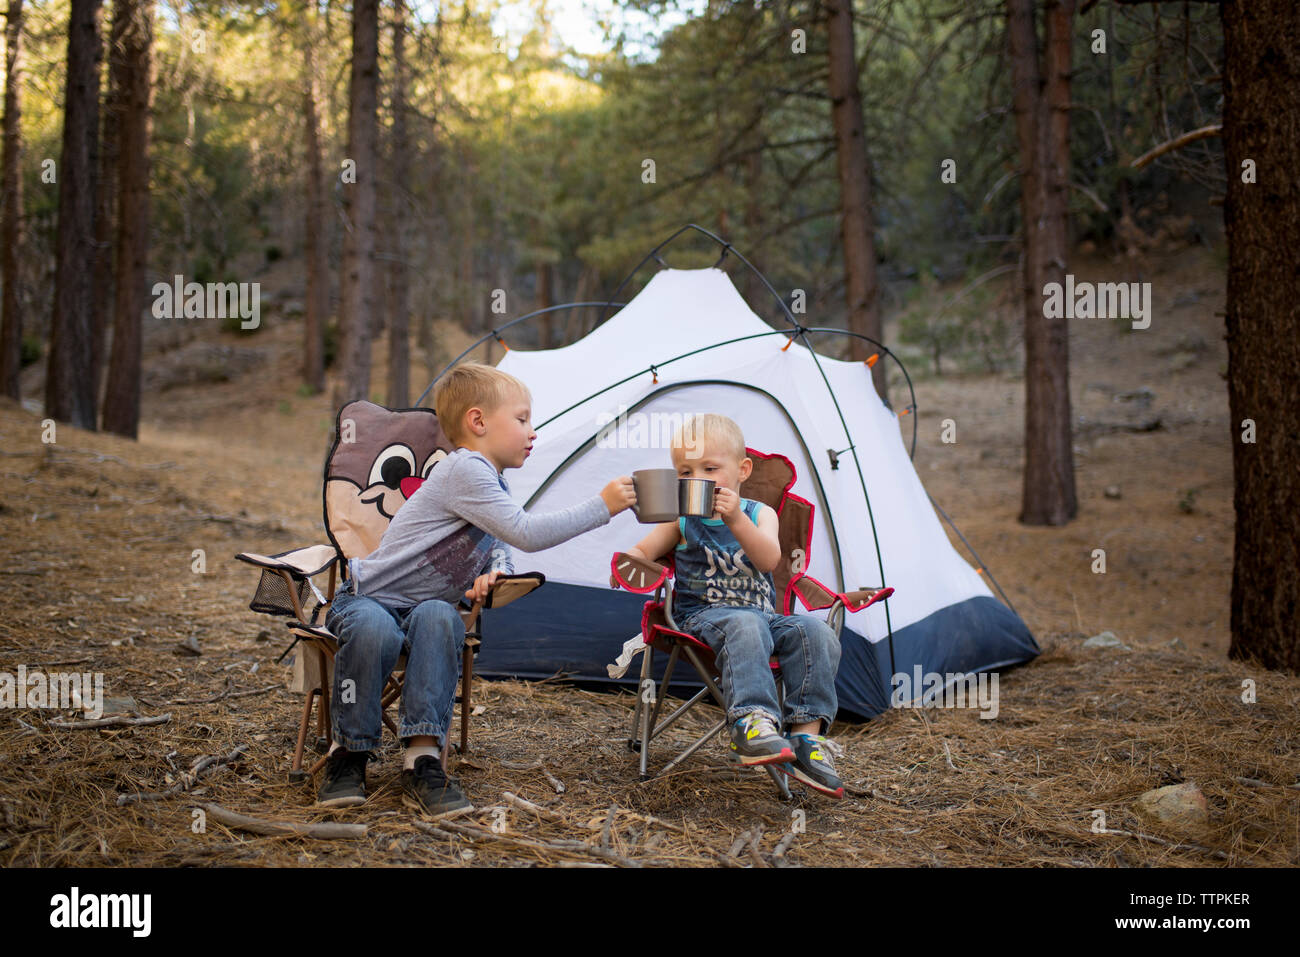 Siblings toasting mugs while sitting on chairs against tent in forest Stock Photo